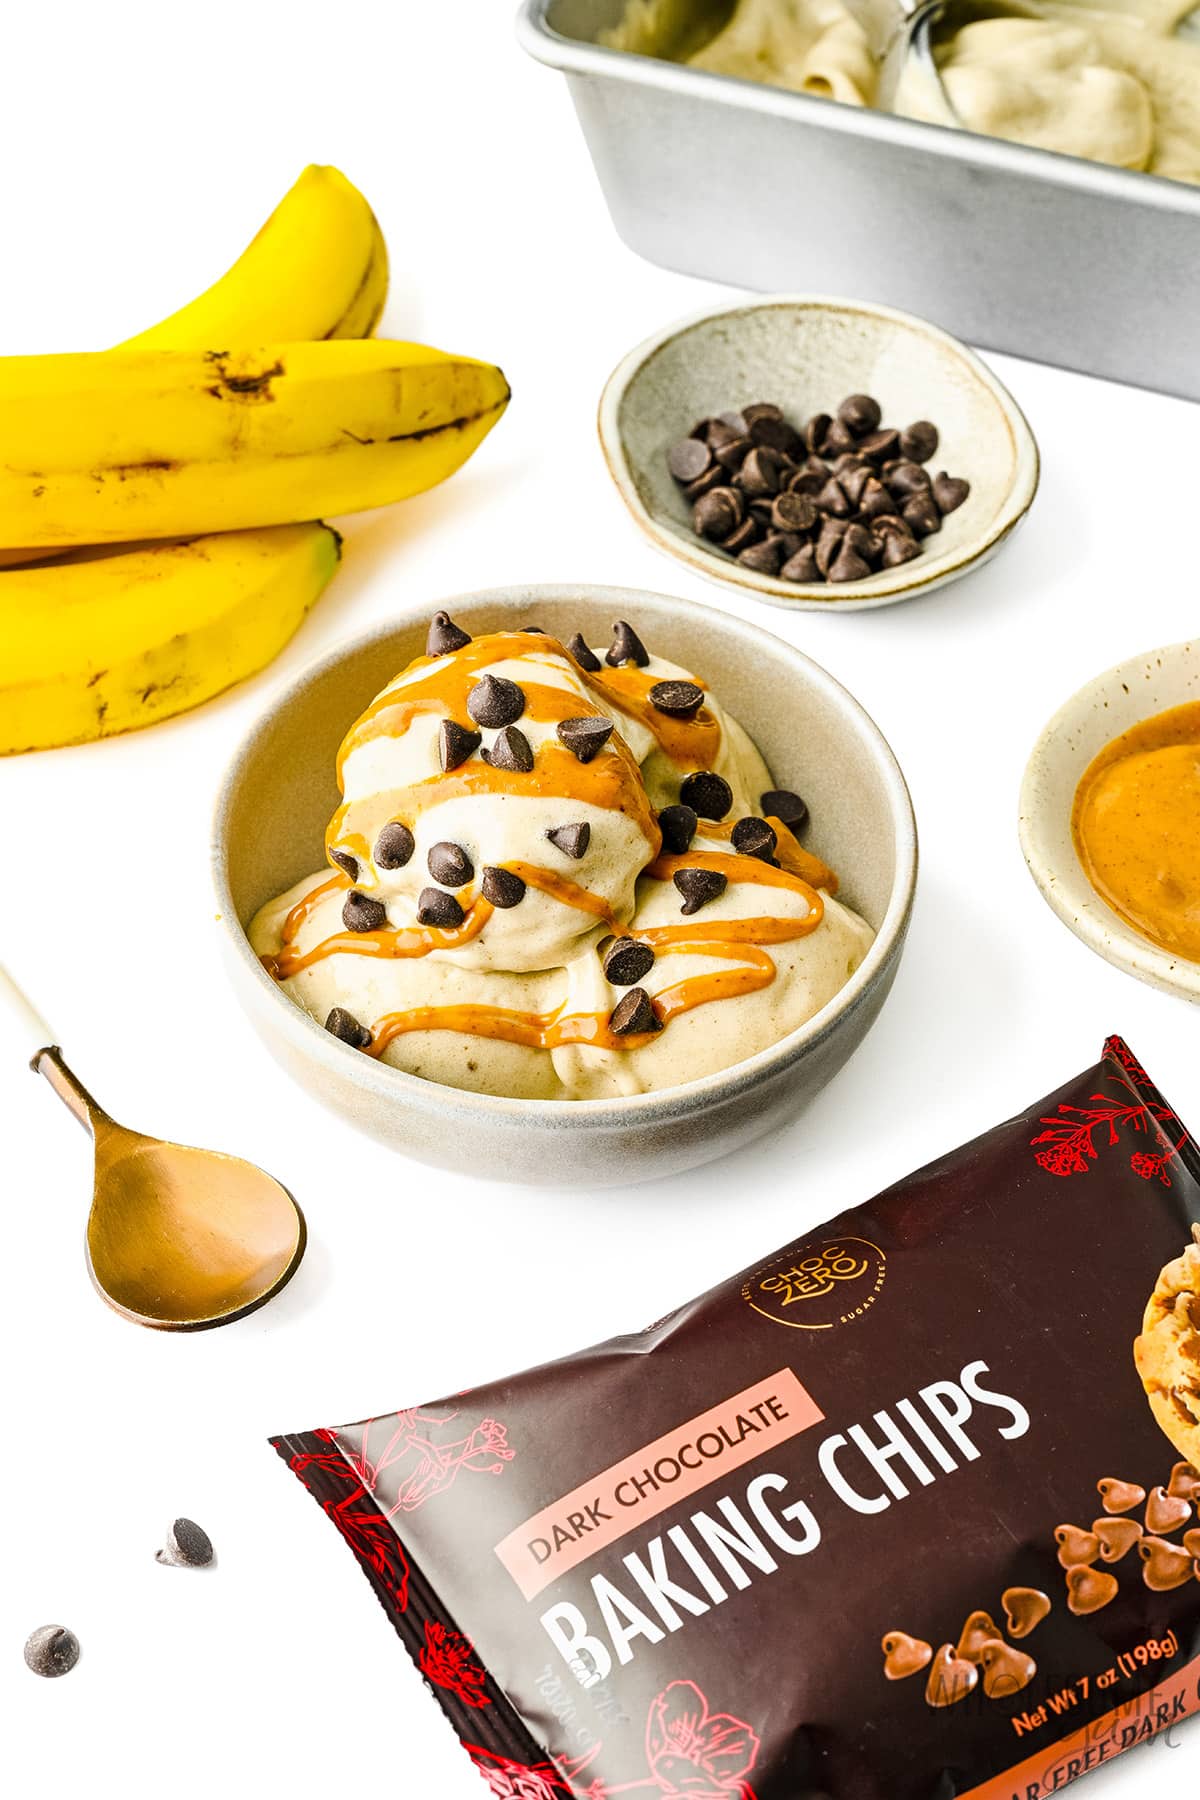 Banana ice cream in a bowl next to chocolate chips and bananas.